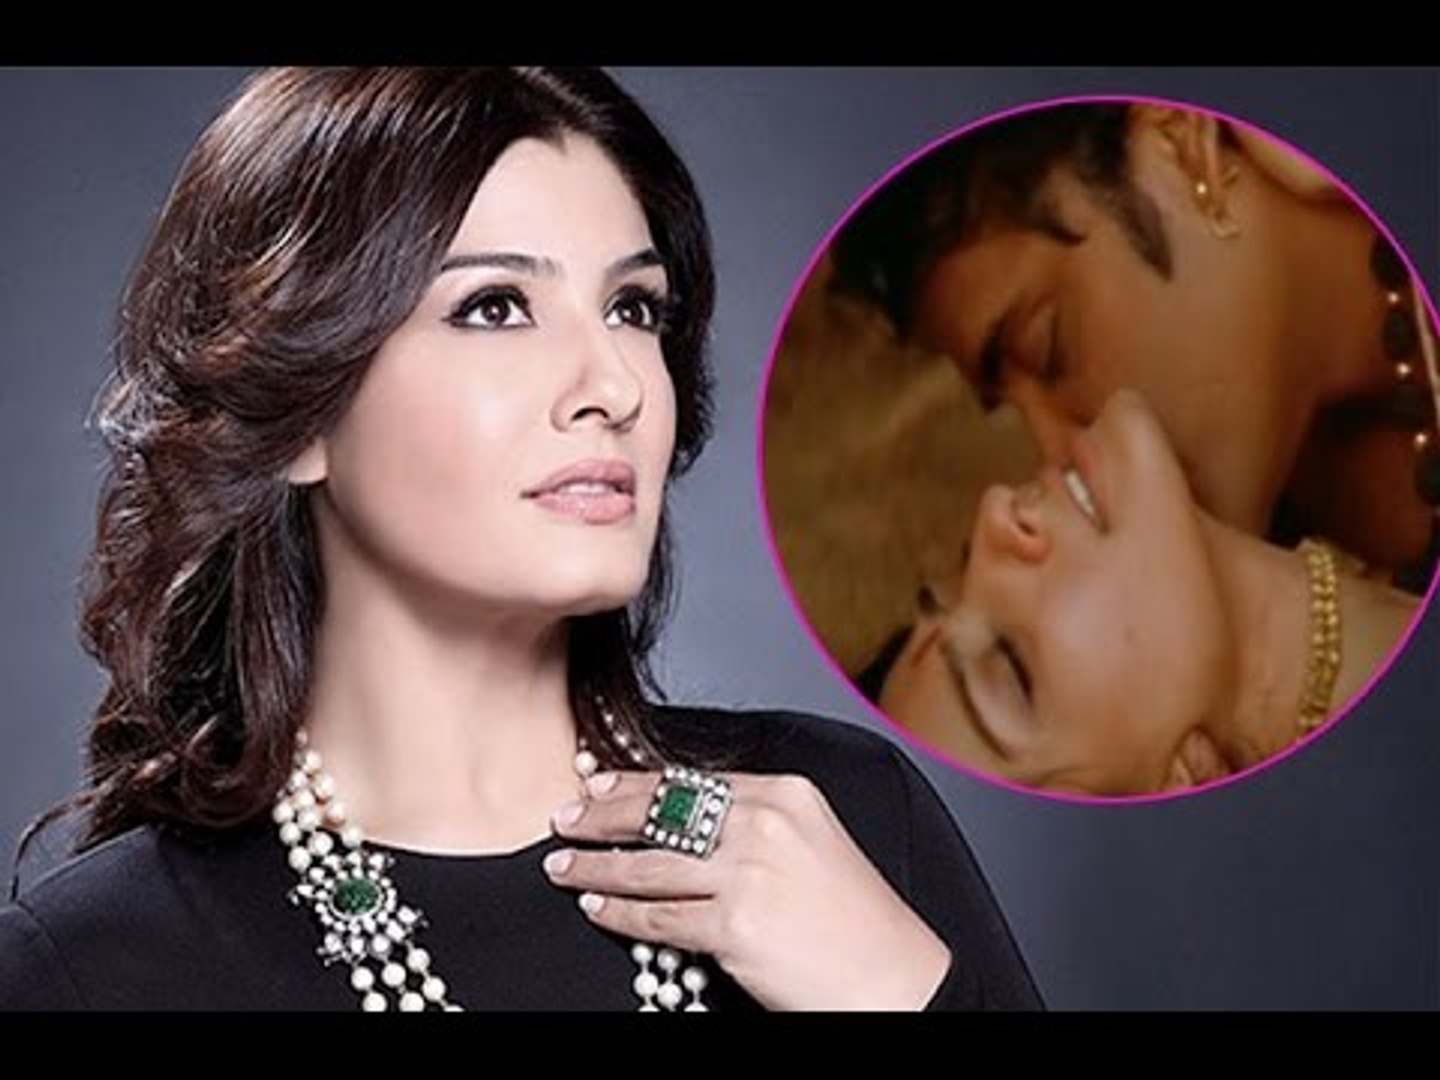 Raveena Tandon Xnxx Sex Video - Raveena Tandon Says Sex is Over Rated in Bollywood - video Dailymotion